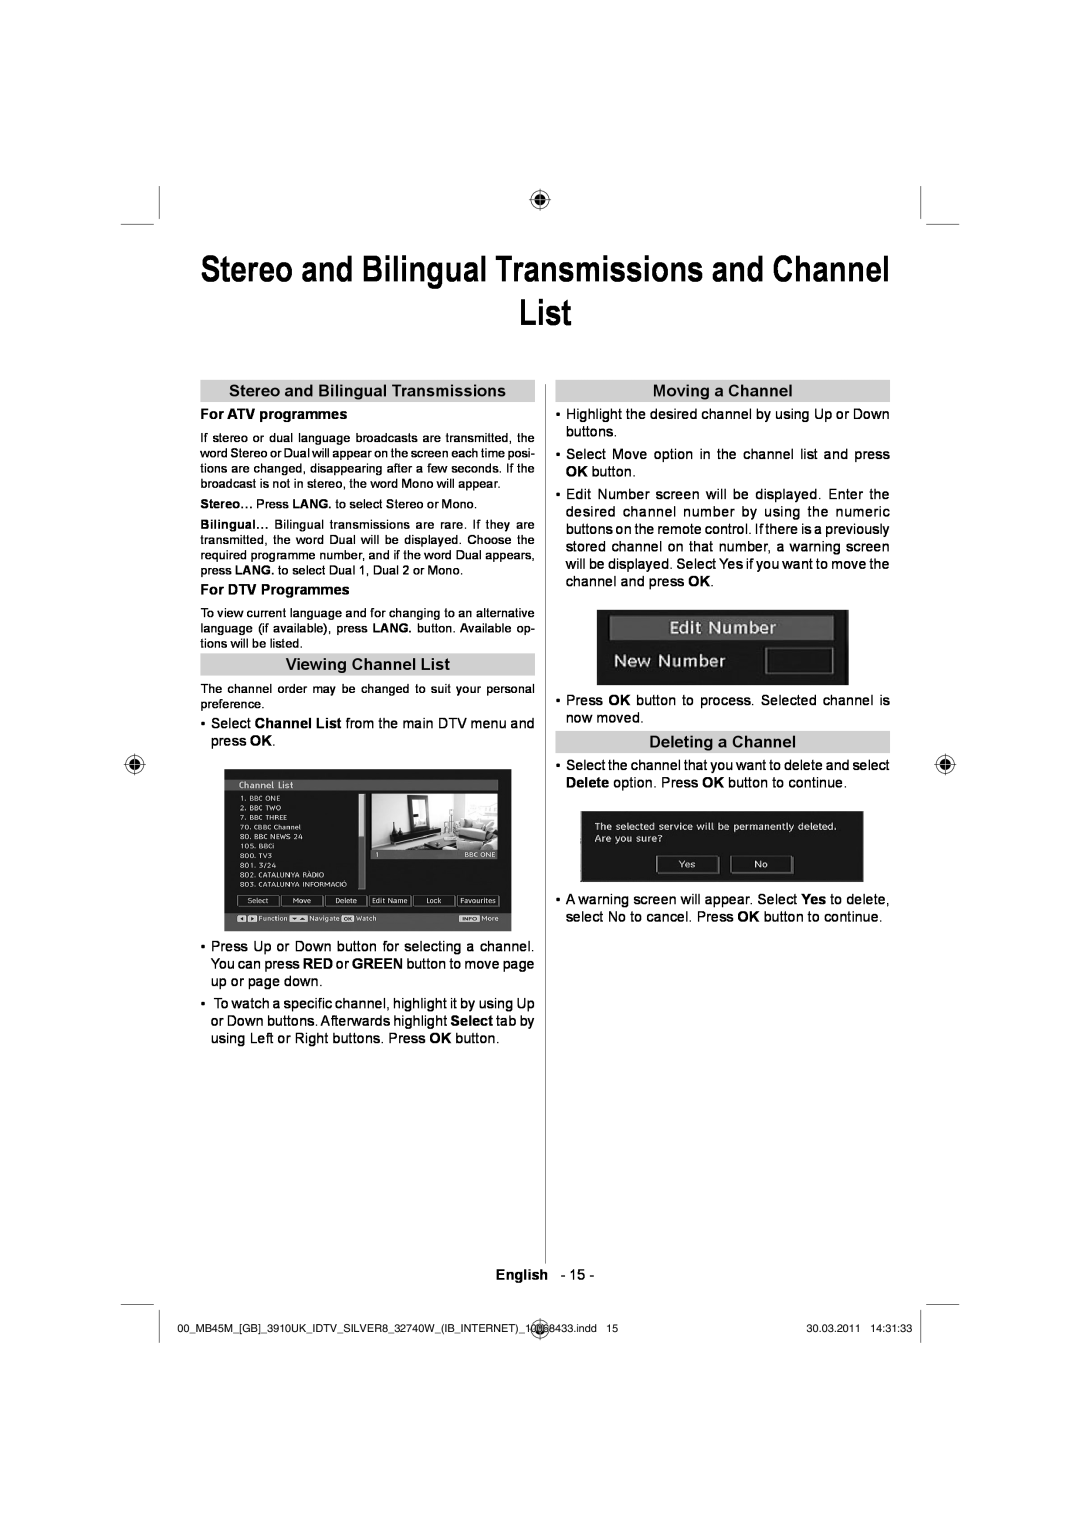 Toshiba 32BV500B owner manual Stereo and Bilingual Transmissions and Channel List, Viewing Channel List, Moving a Channel 